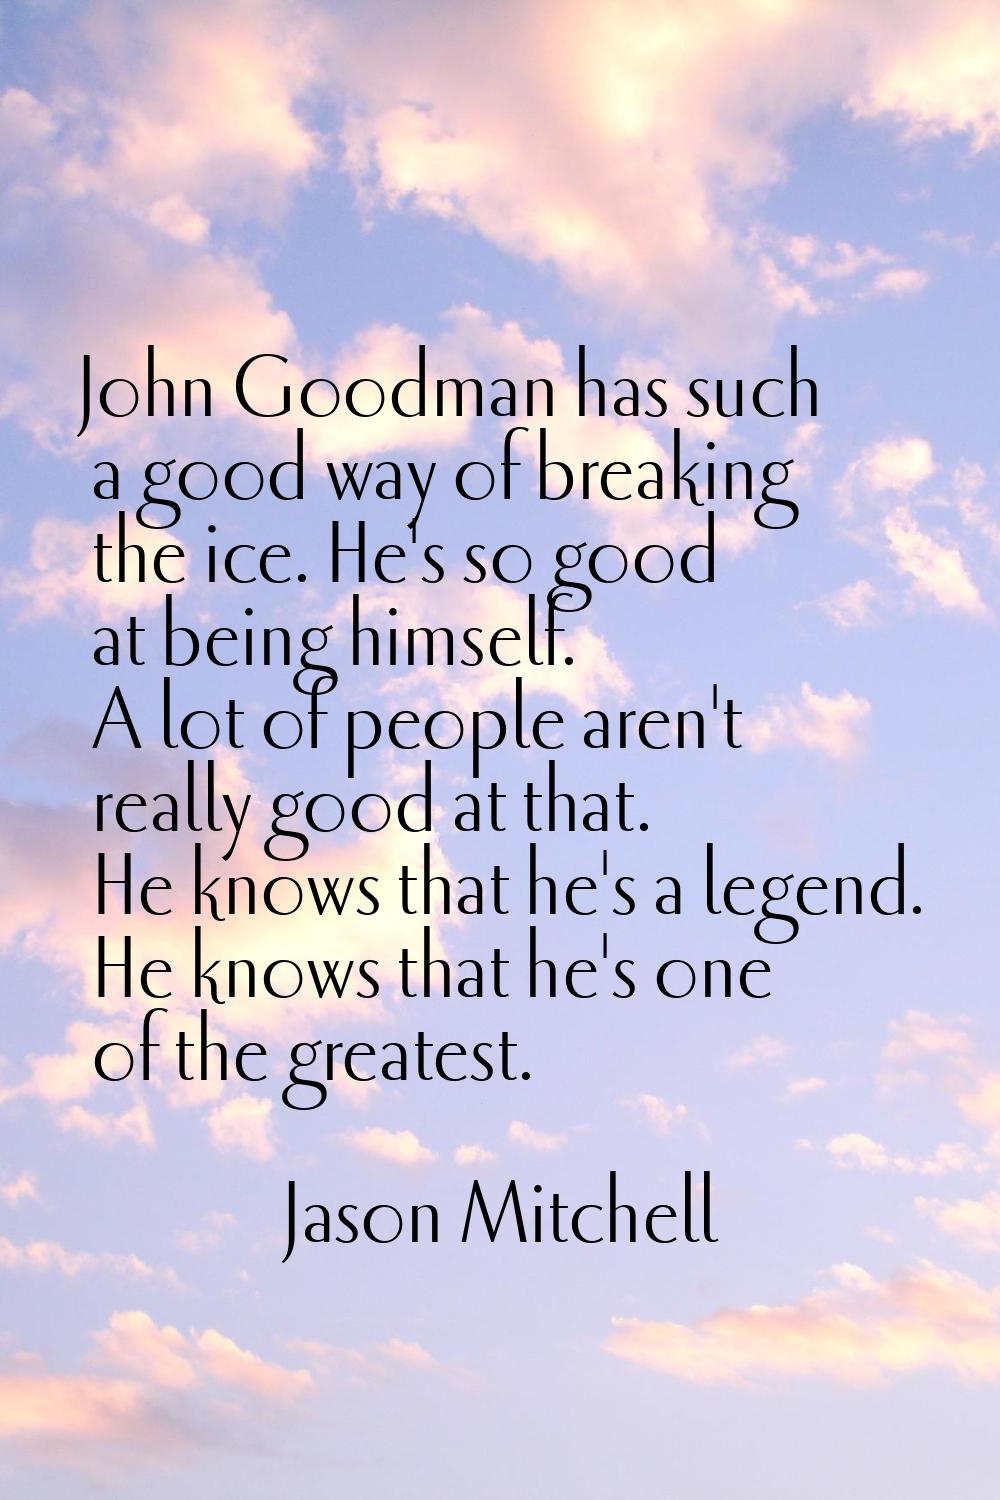 John Goodman has such a good way of breaking the ice. He's so good at being himself. A lot of peopl